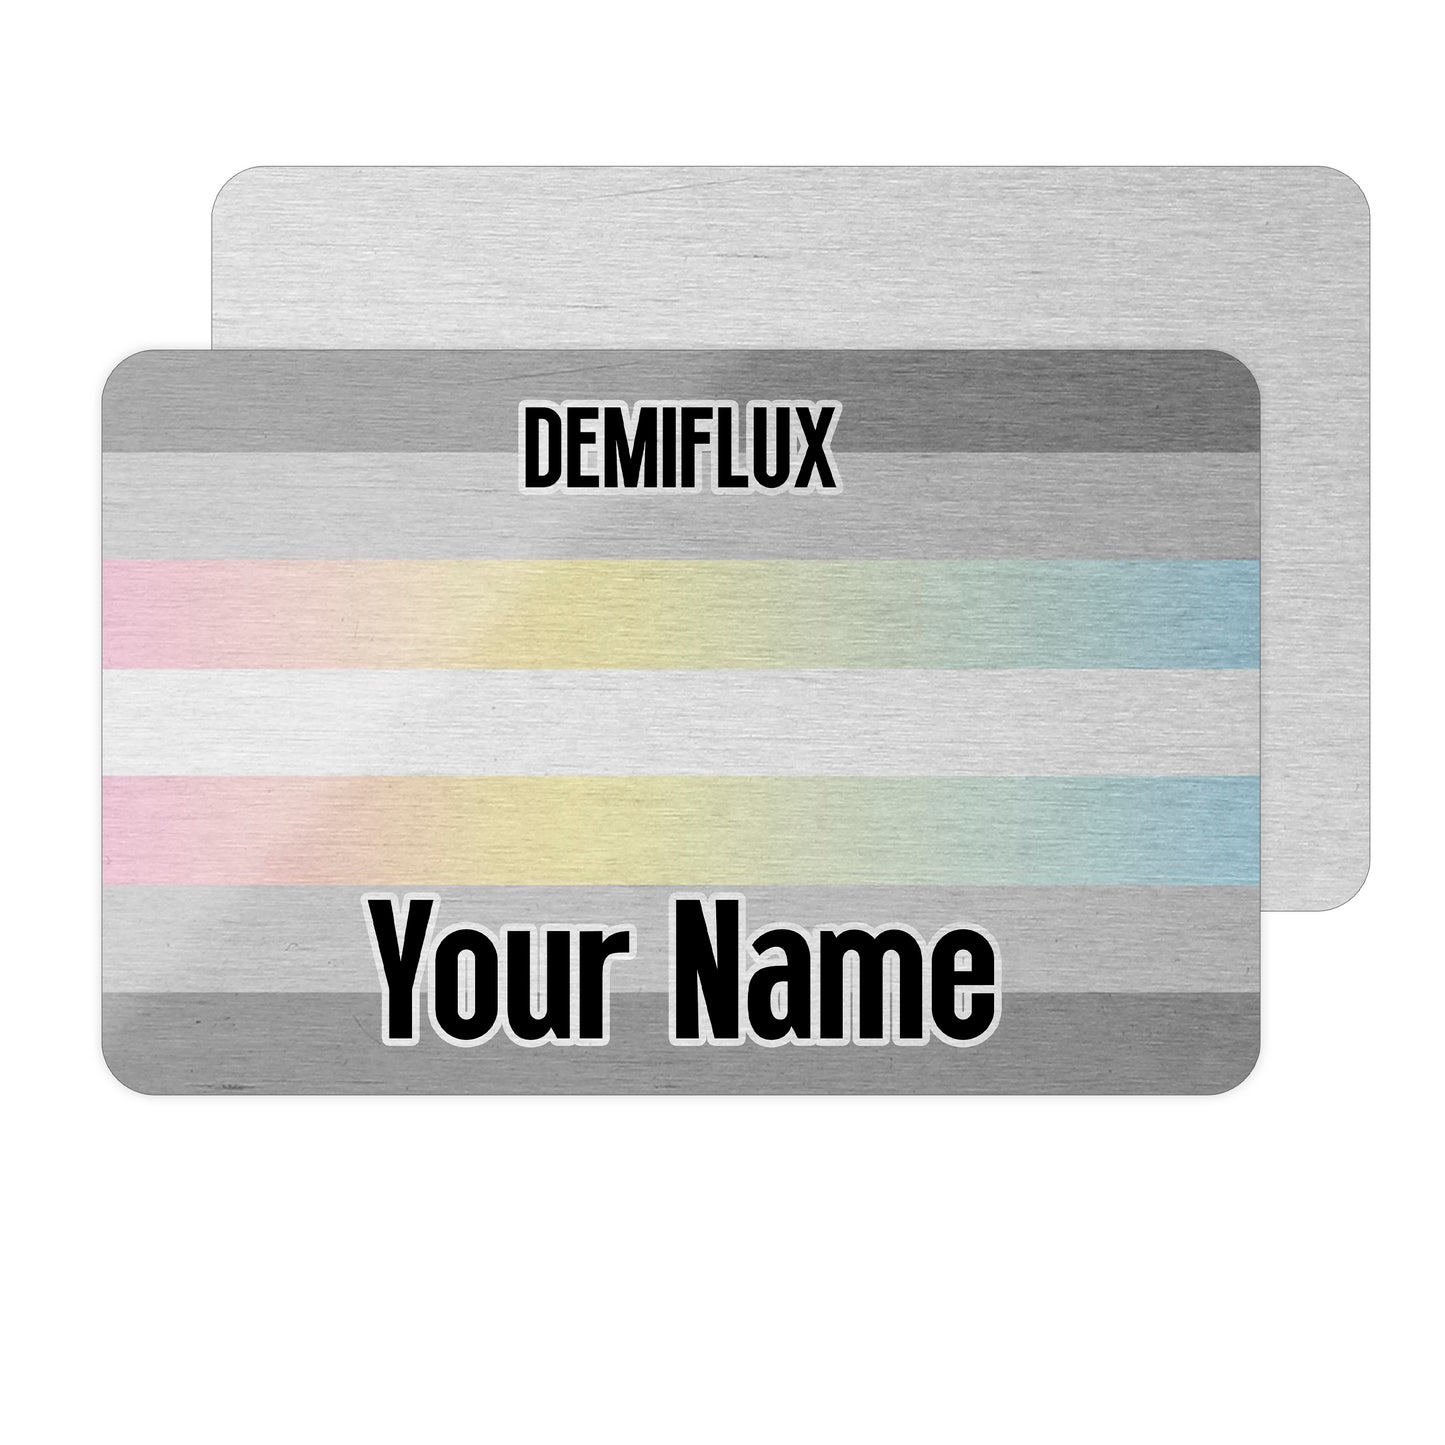 aluminium wallet card personalised with your name and the demiflux pride flag